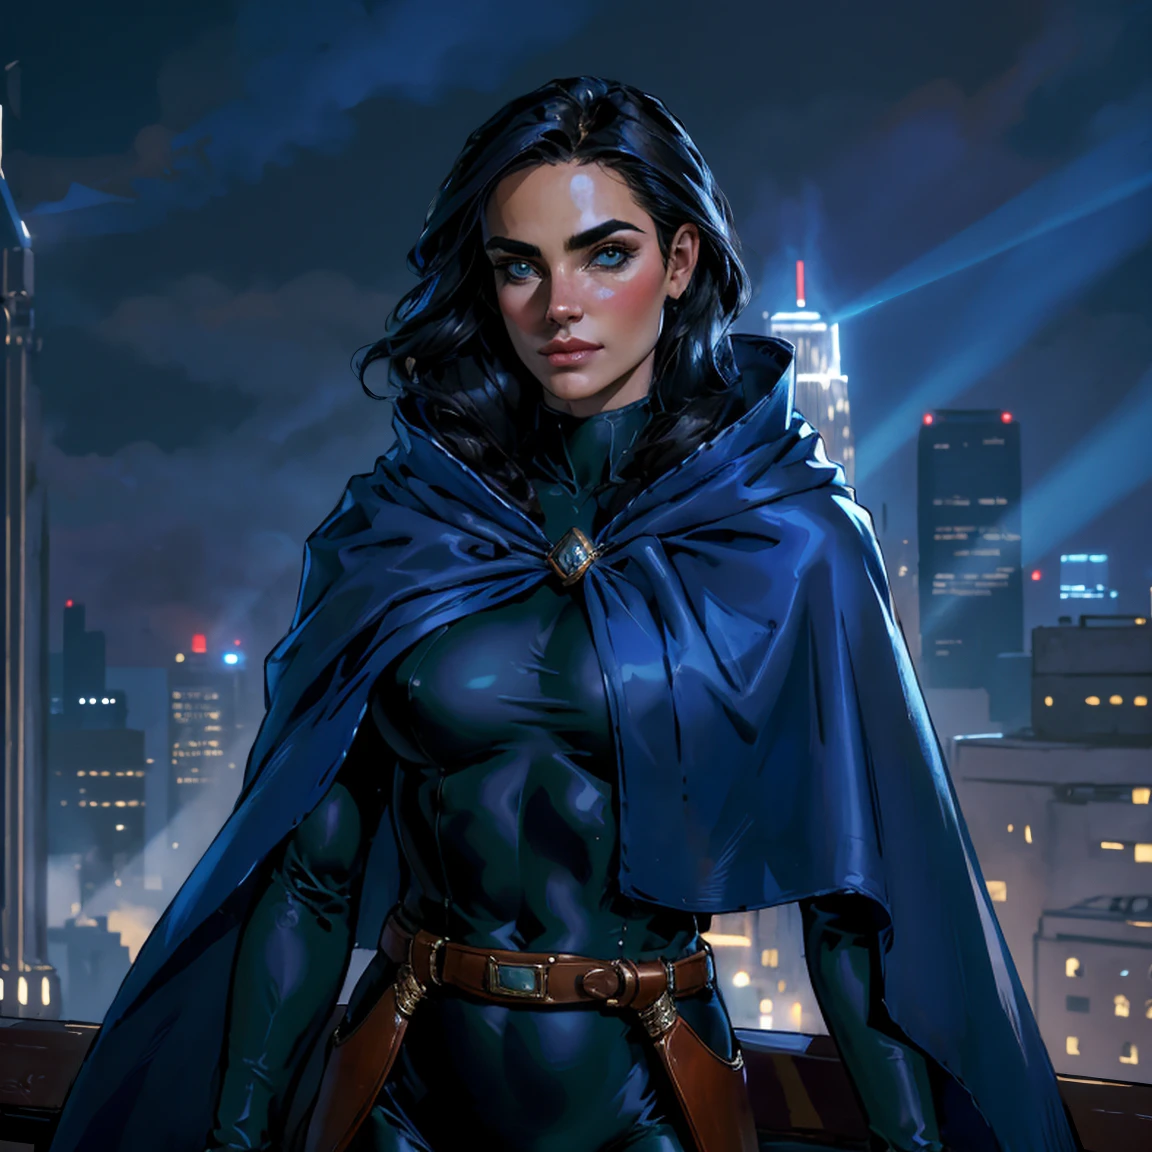 Masterpiece, Jennifer Connelly, cowboy shot, RavenTT, wearing a sexy RavenTT navy-blue cloak, black leotard, brooch, belt, perfect detailed eyes, delicate smile on your face, on the top of a loft in Los Angeles City at night with buildings and lights in the background bringing an elegant and modern air to the scene.